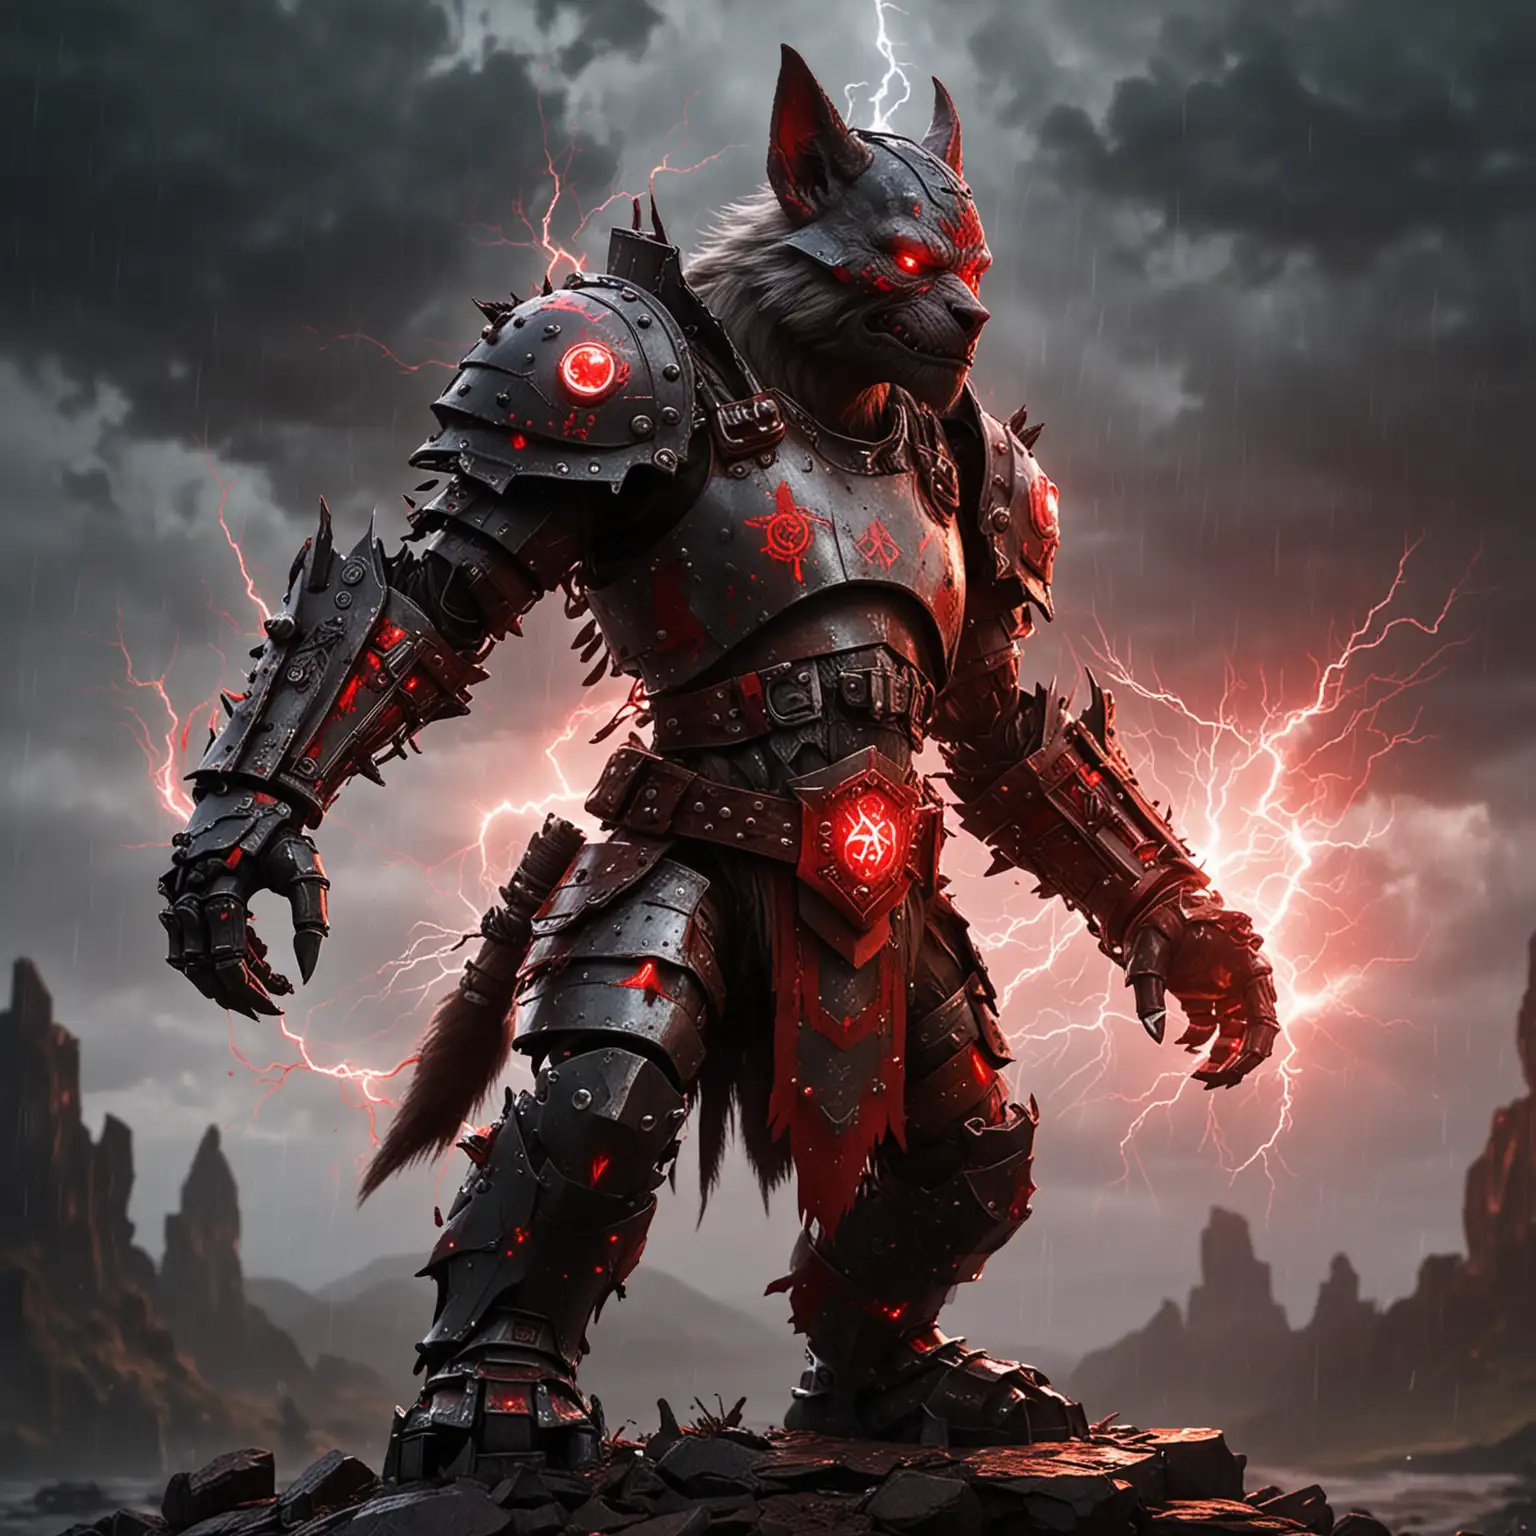 Blood Magic Robot WerewolfGnome Cyborg in Ancient Plate Armor at Dawn